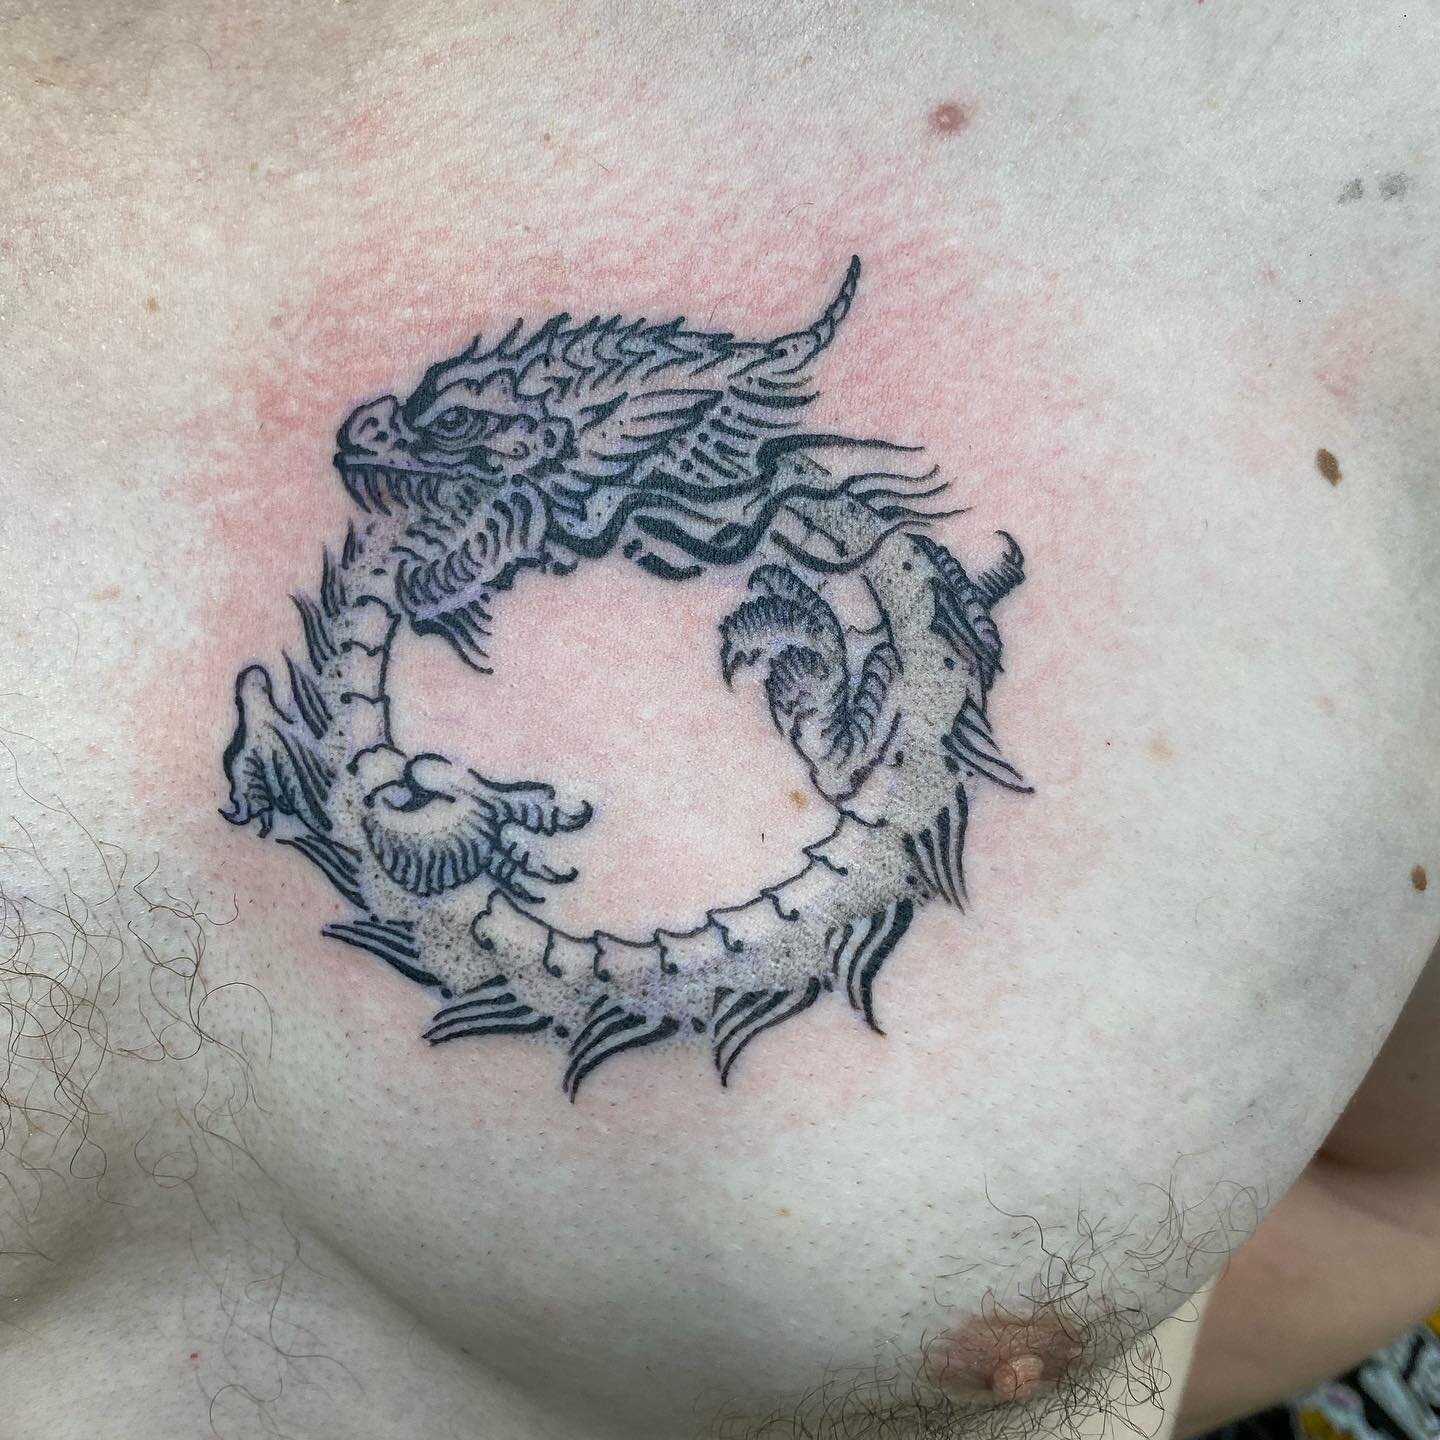 Ouroboros 🐲 done by 
@tachetattoos 

Email or call to book 
flyingdutchmantattoos635@gmail.com 
484-373-4457 
☠️
Or stop in and chat in person we are open 7days a week 
Mon-Fri 12pm-8pm 
Sat-Sun 12pm-6pm